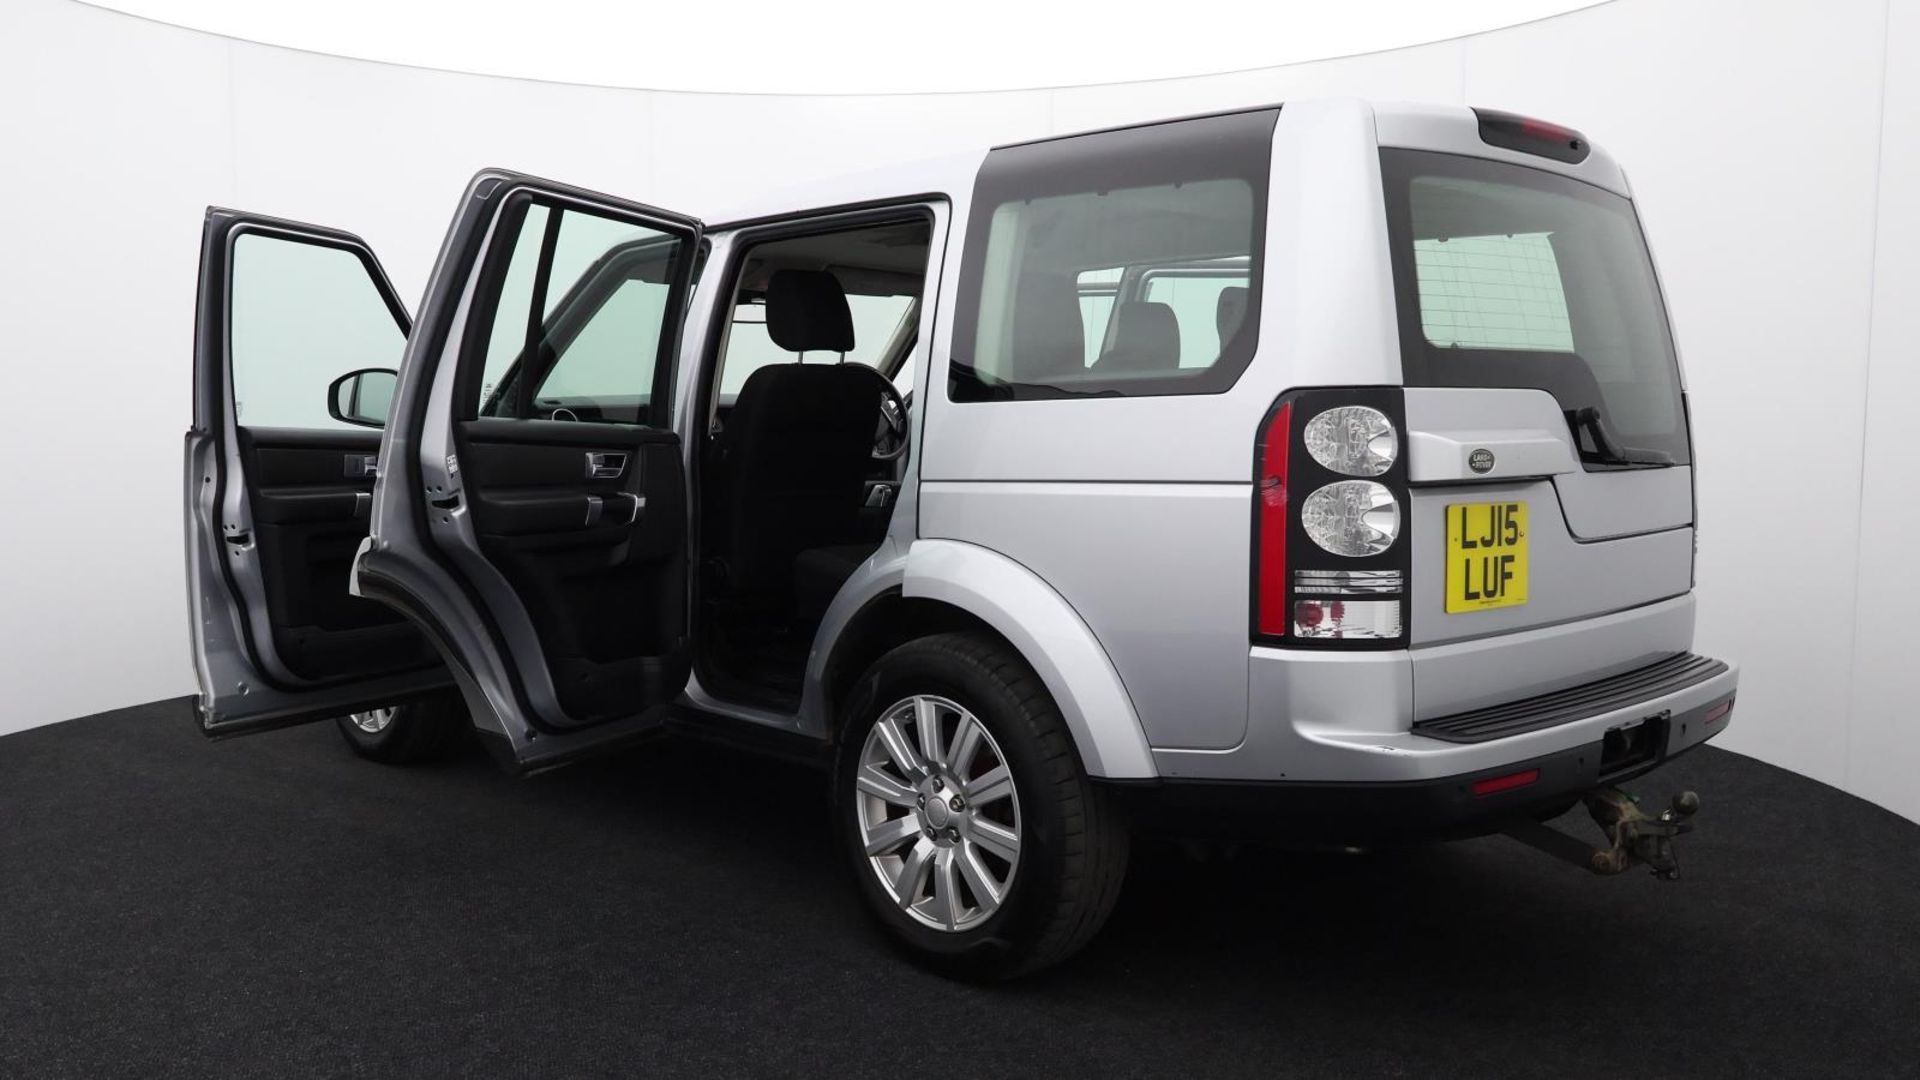 Land Rover Discovery SDV6 SE - 2015 - Automatic - Diesel - 2993cc 6 Cylinder engine - LJ15 LUF - Image 15 of 42